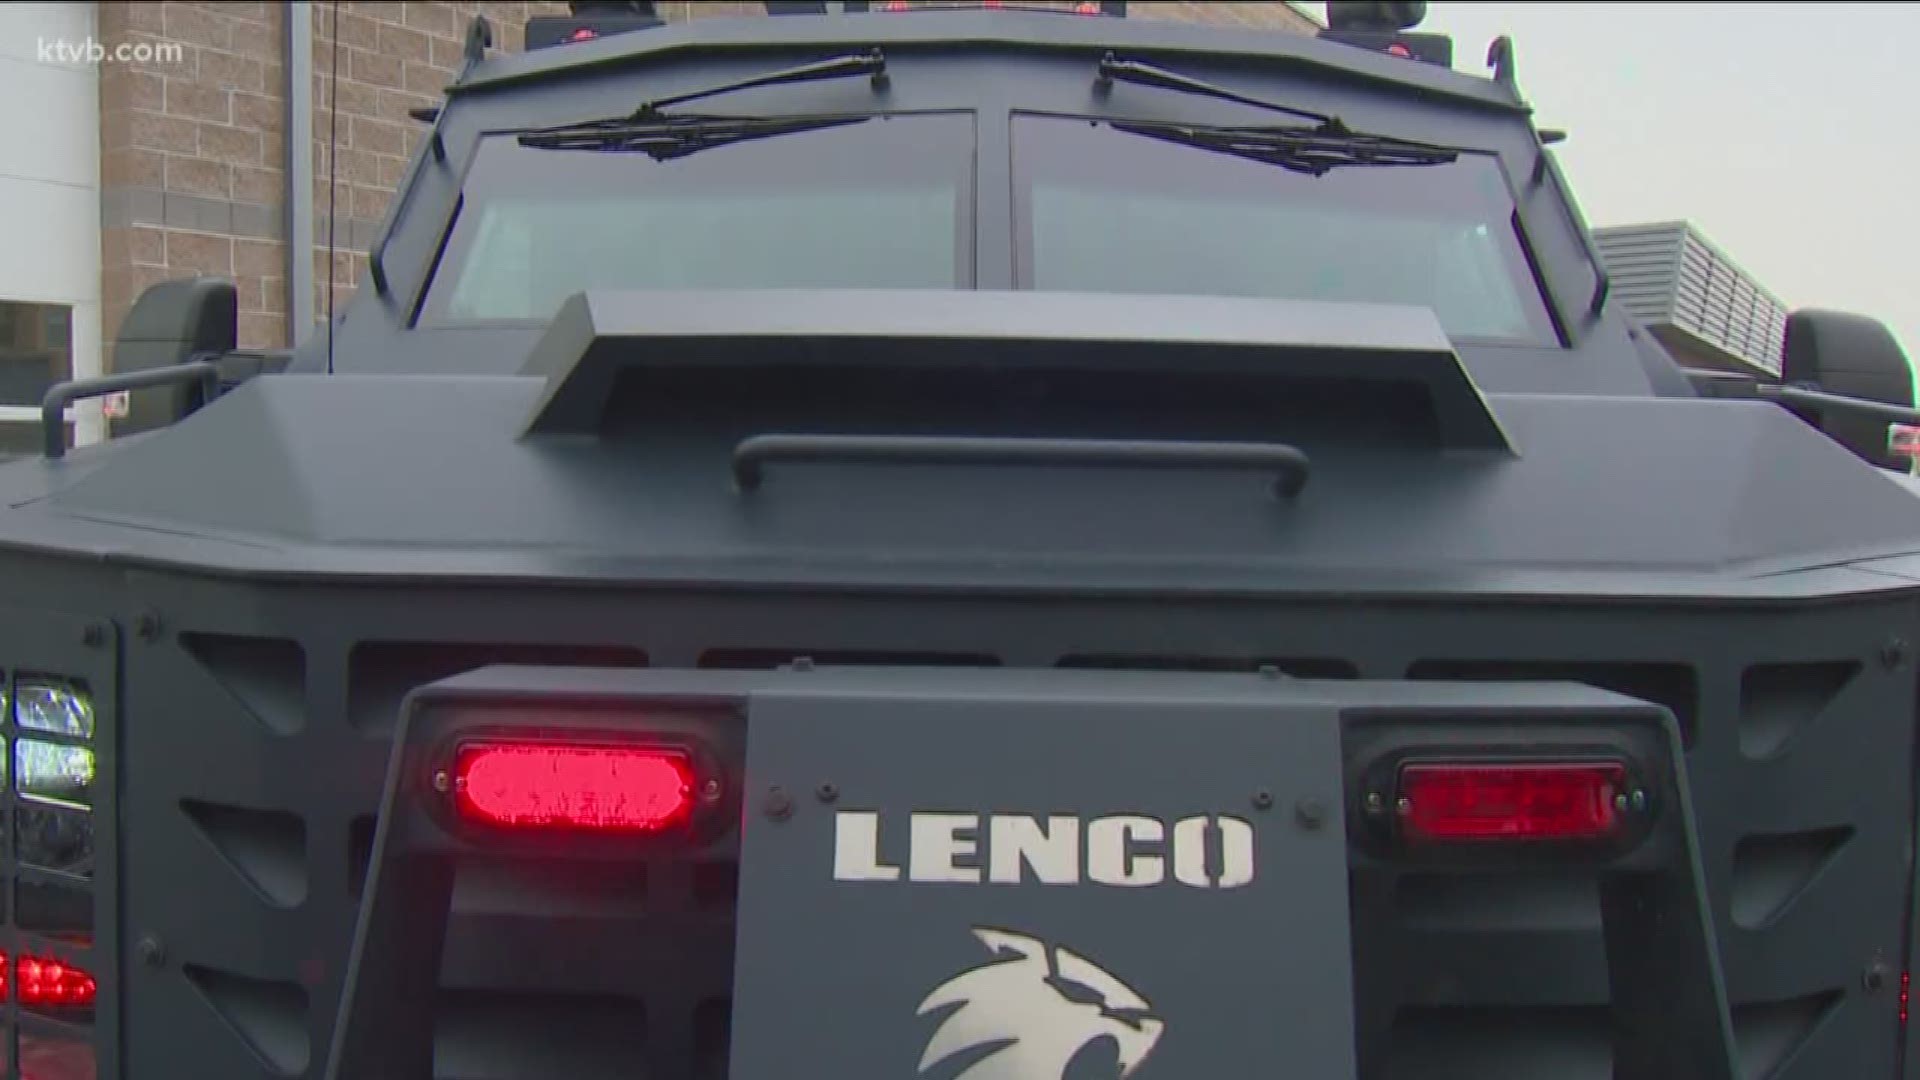 The new MedCat armored ambulance is designed to take paramedics into dangerous situations.